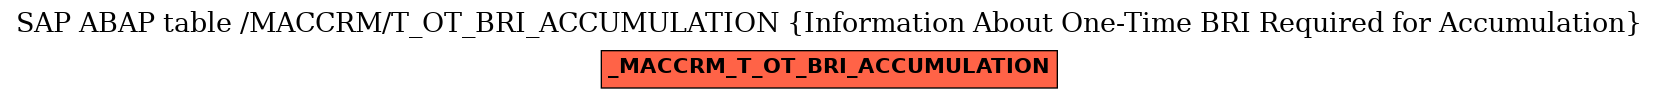 E-R Diagram for table /MACCRM/T_OT_BRI_ACCUMULATION (Information About One-Time BRI Required for Accumulation)